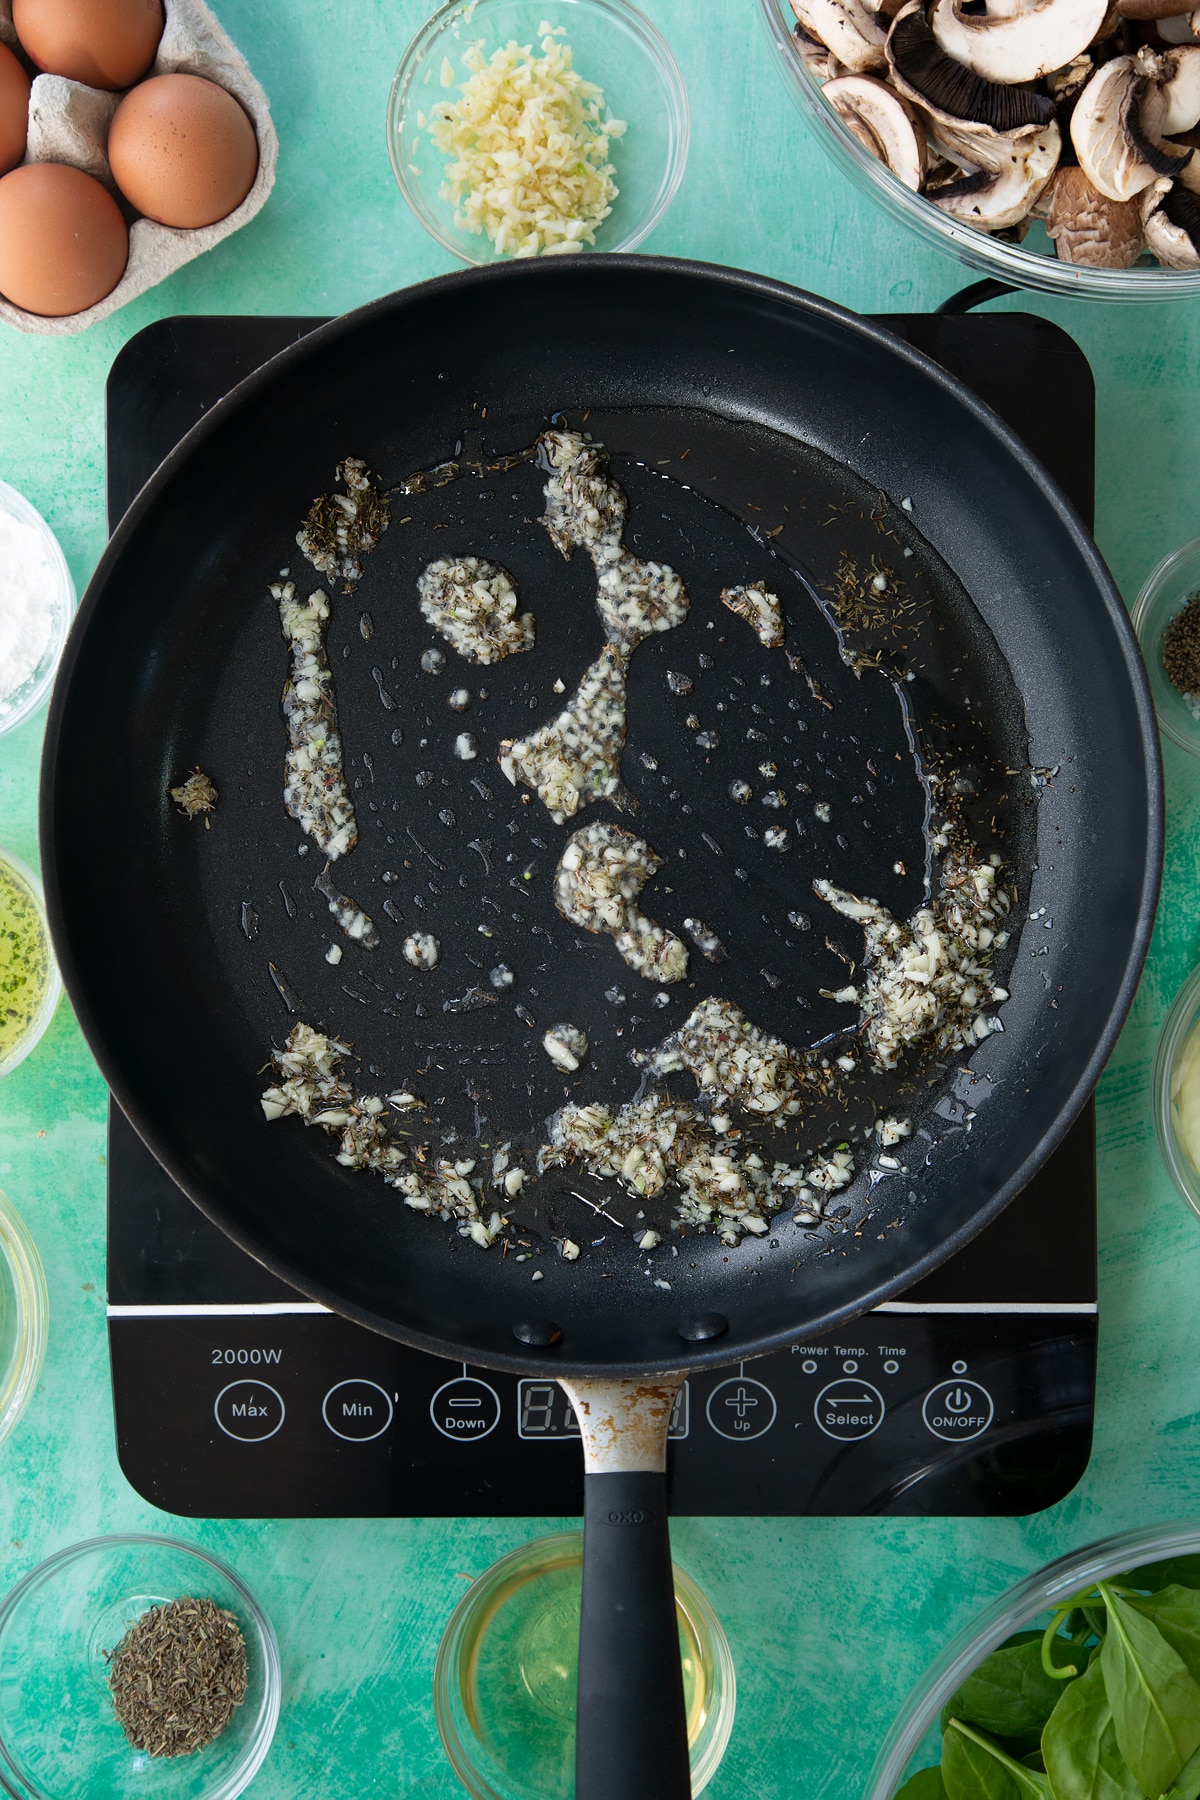 a large black frying pan on an induction hob with mixed minced garlic, herbs and oil.